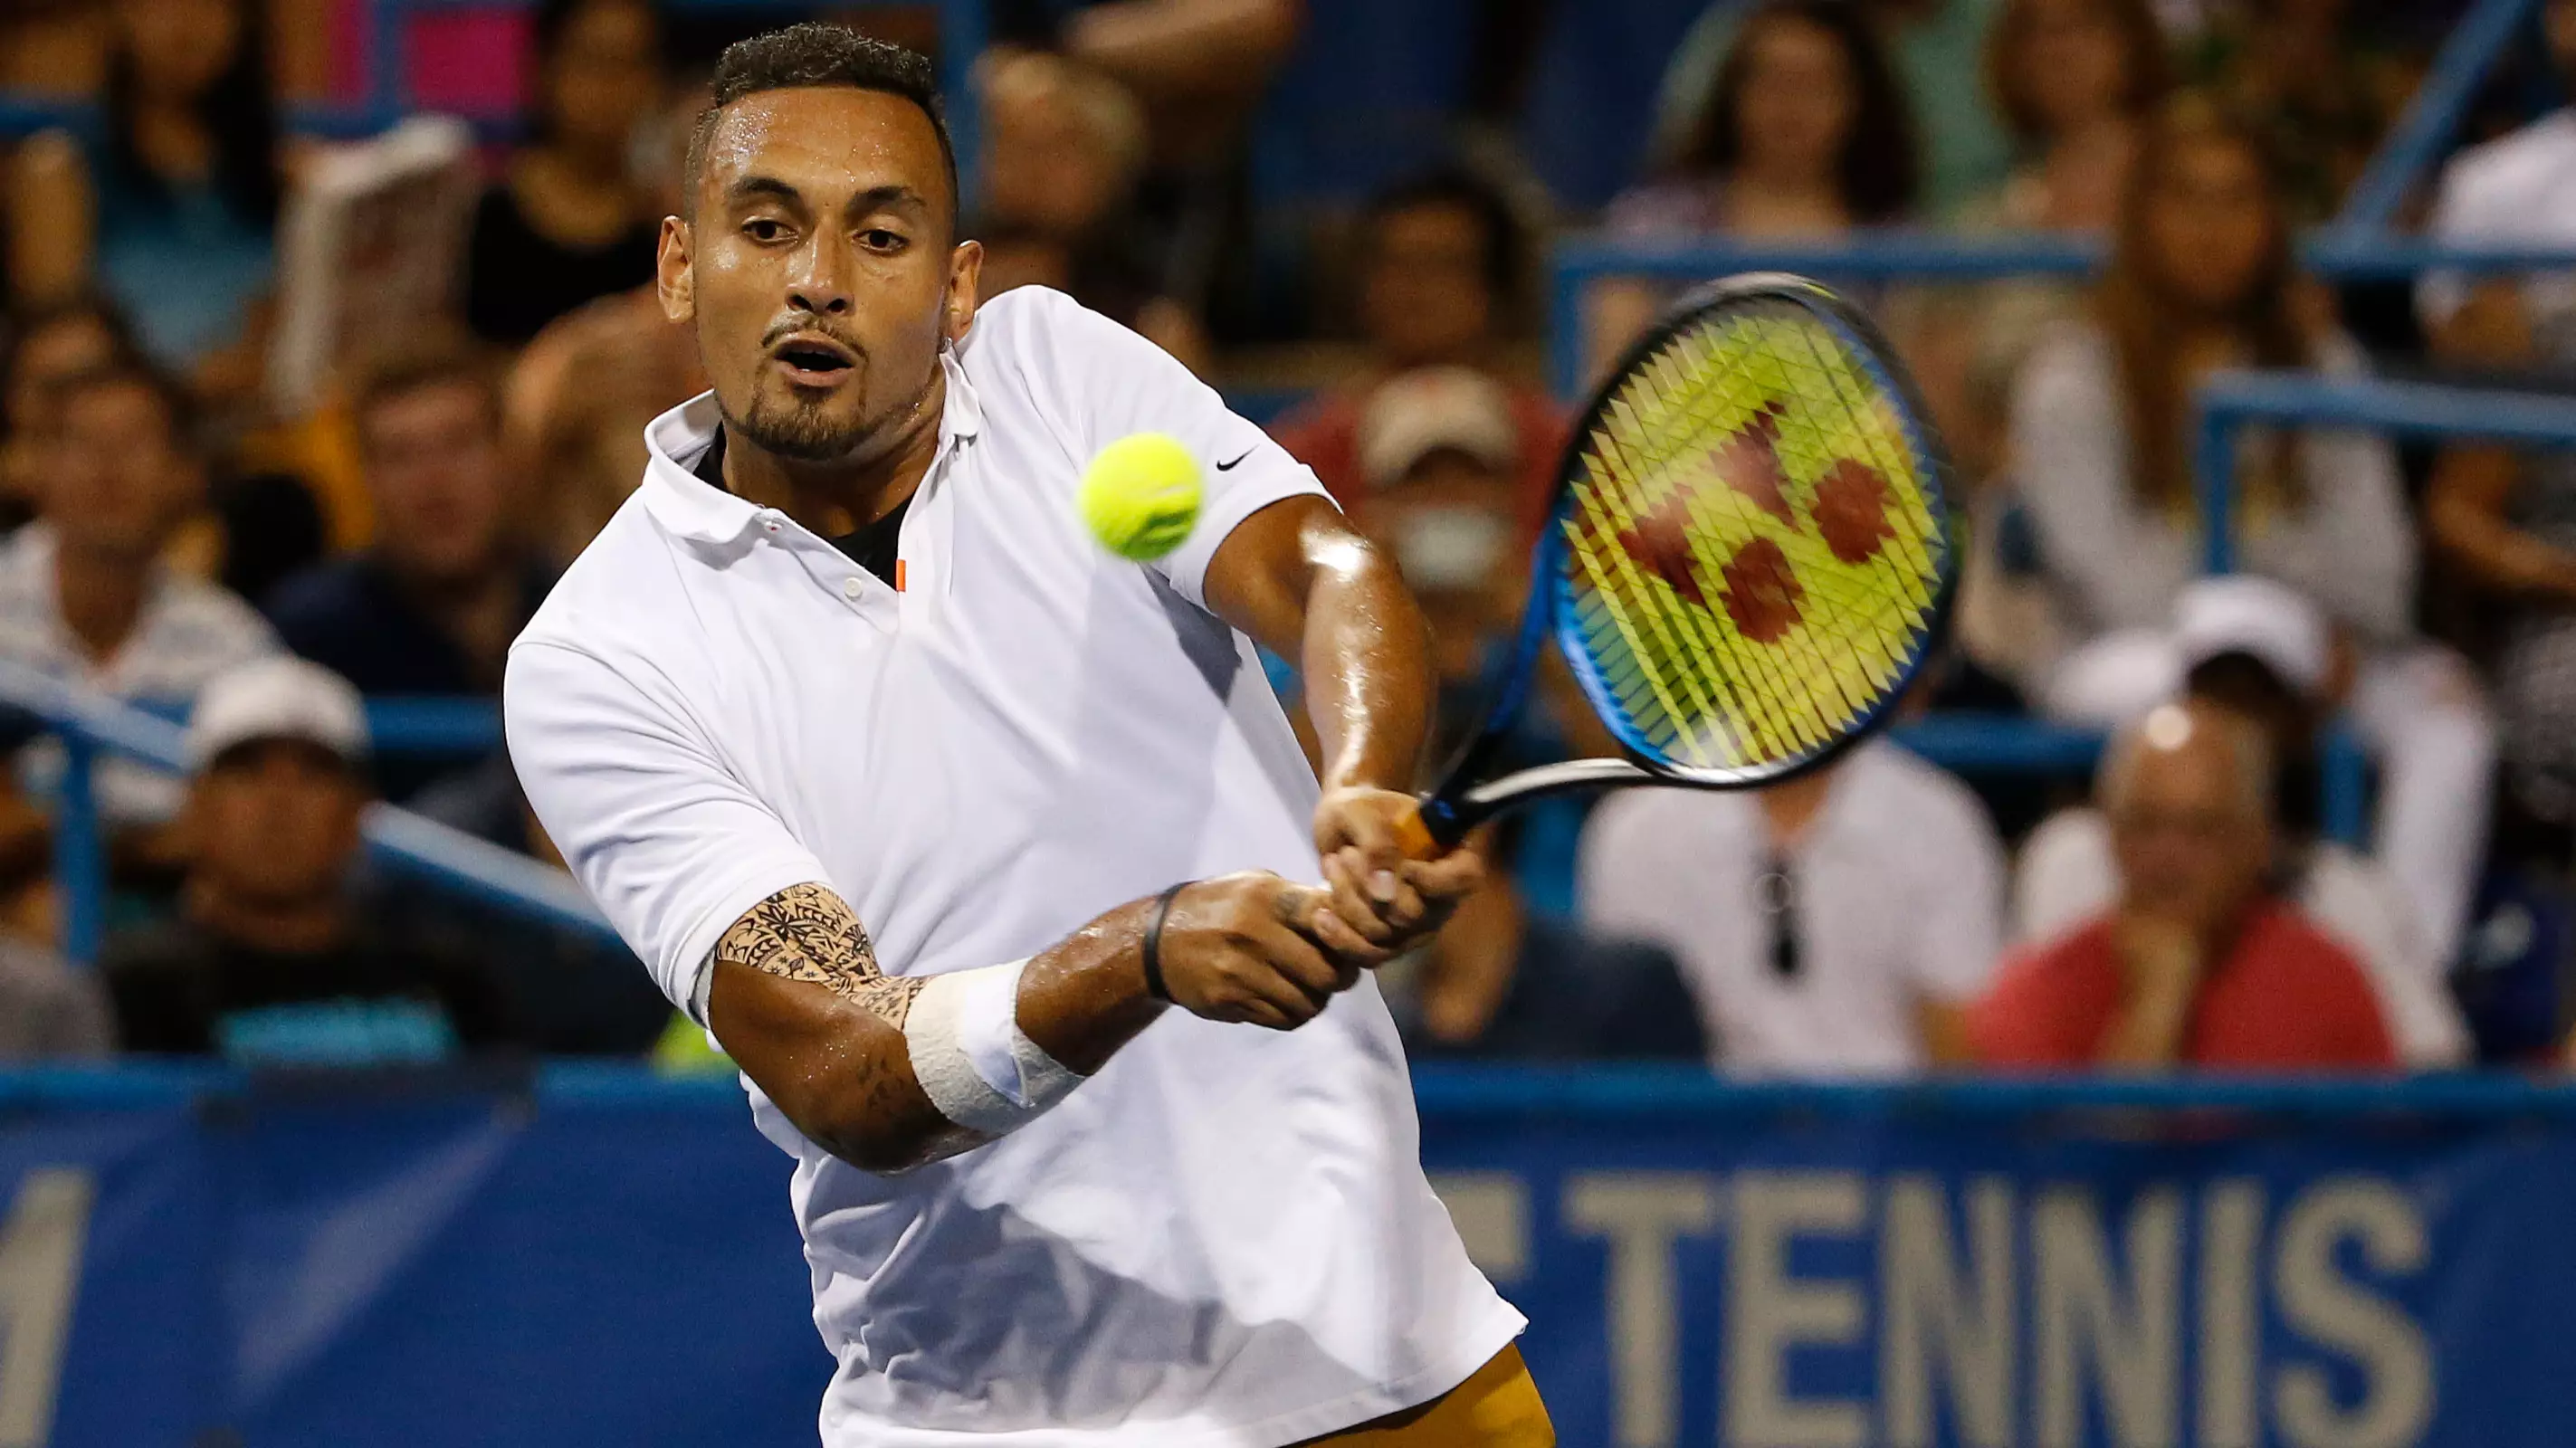 Nick Kyrgios Asks Fan For Advice Before Serving An Ace And Winning The Match